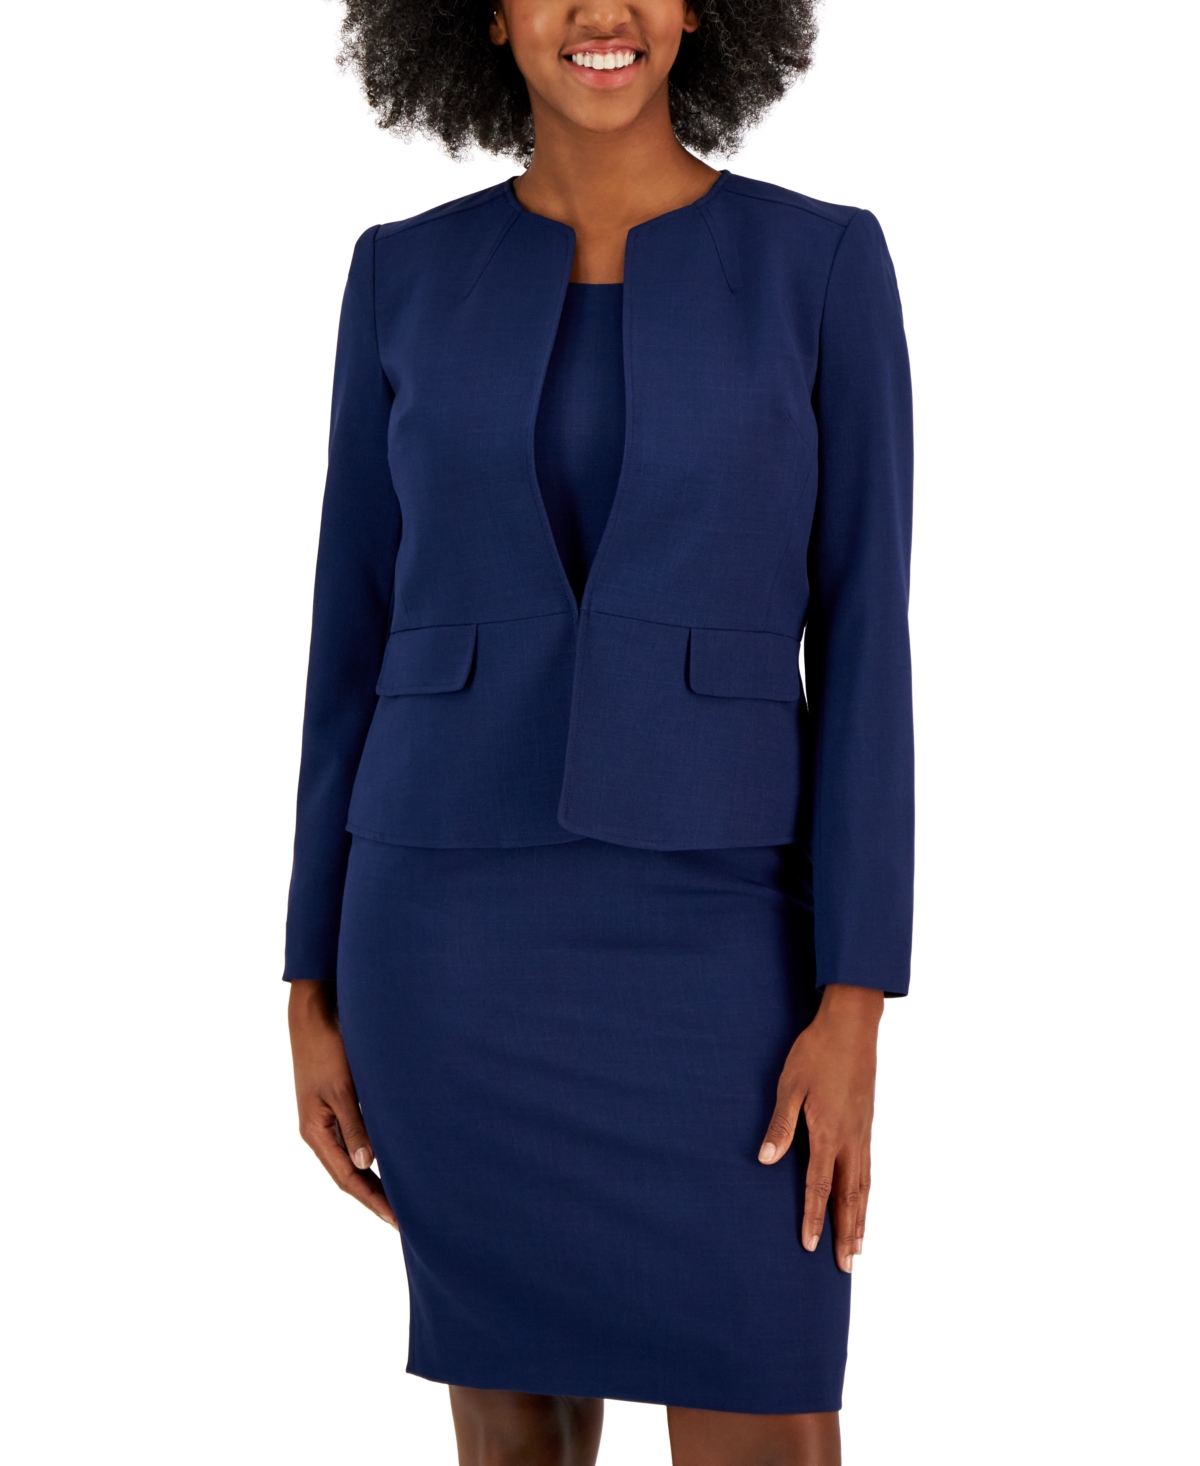 Le Suit Collarless Dress Suit, Regular & Petite Sizes In Bright Navy